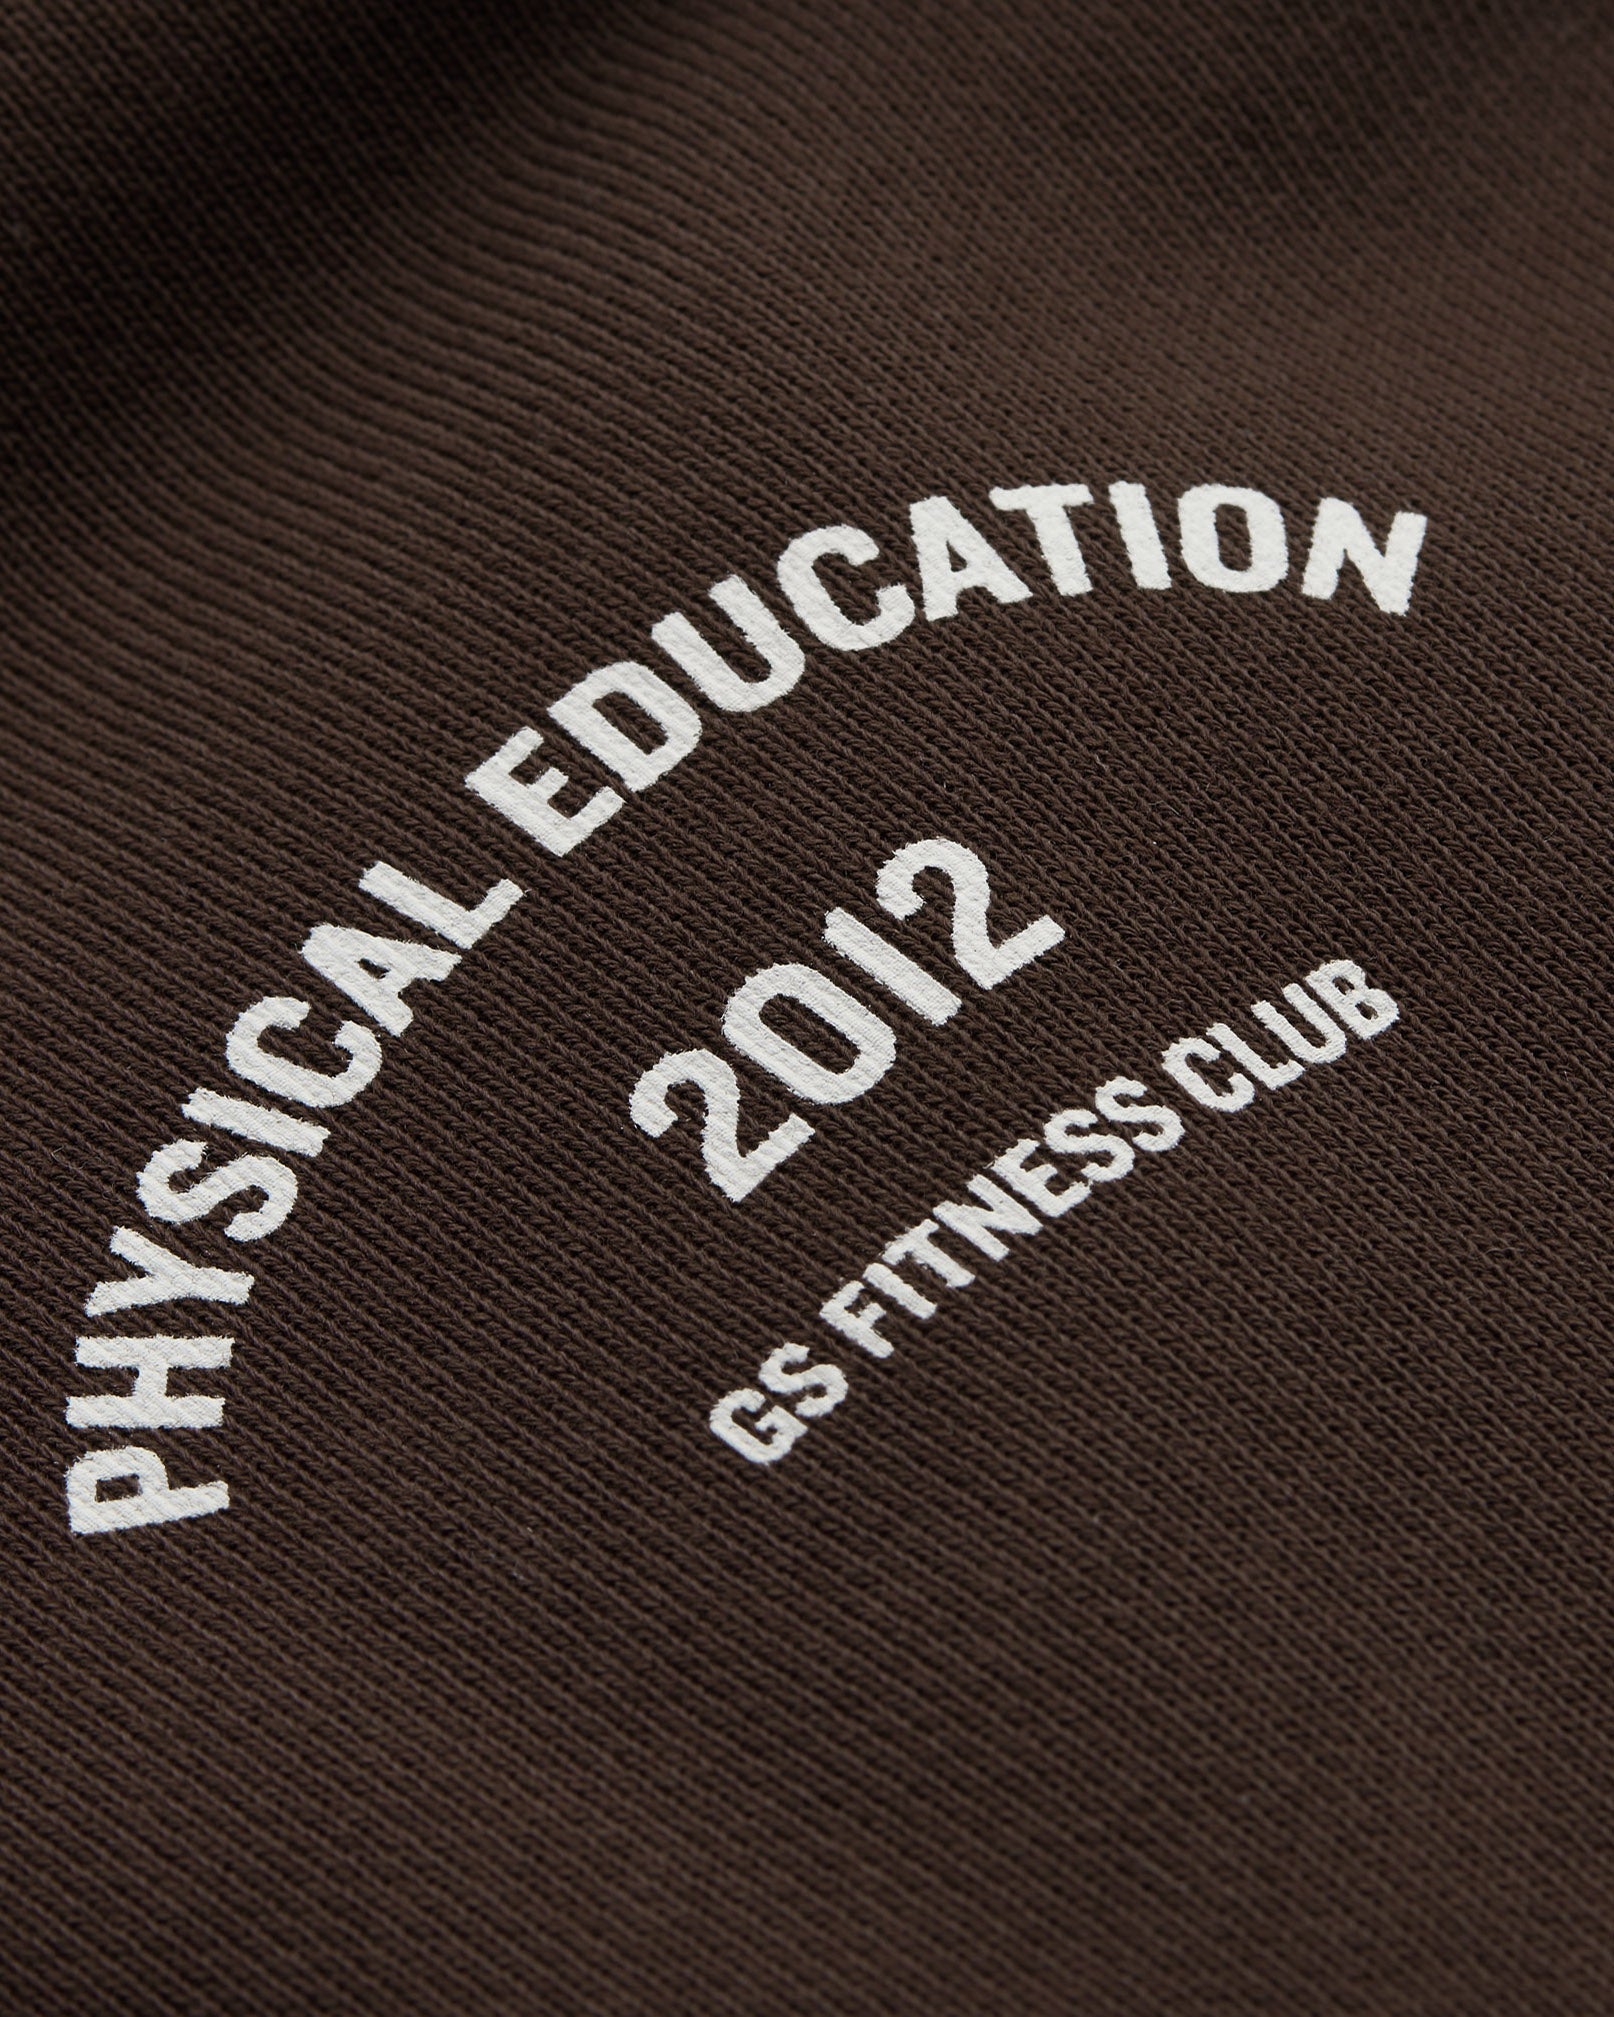 Phys Ed Graphic Hoodie in Archive Brown - view 6